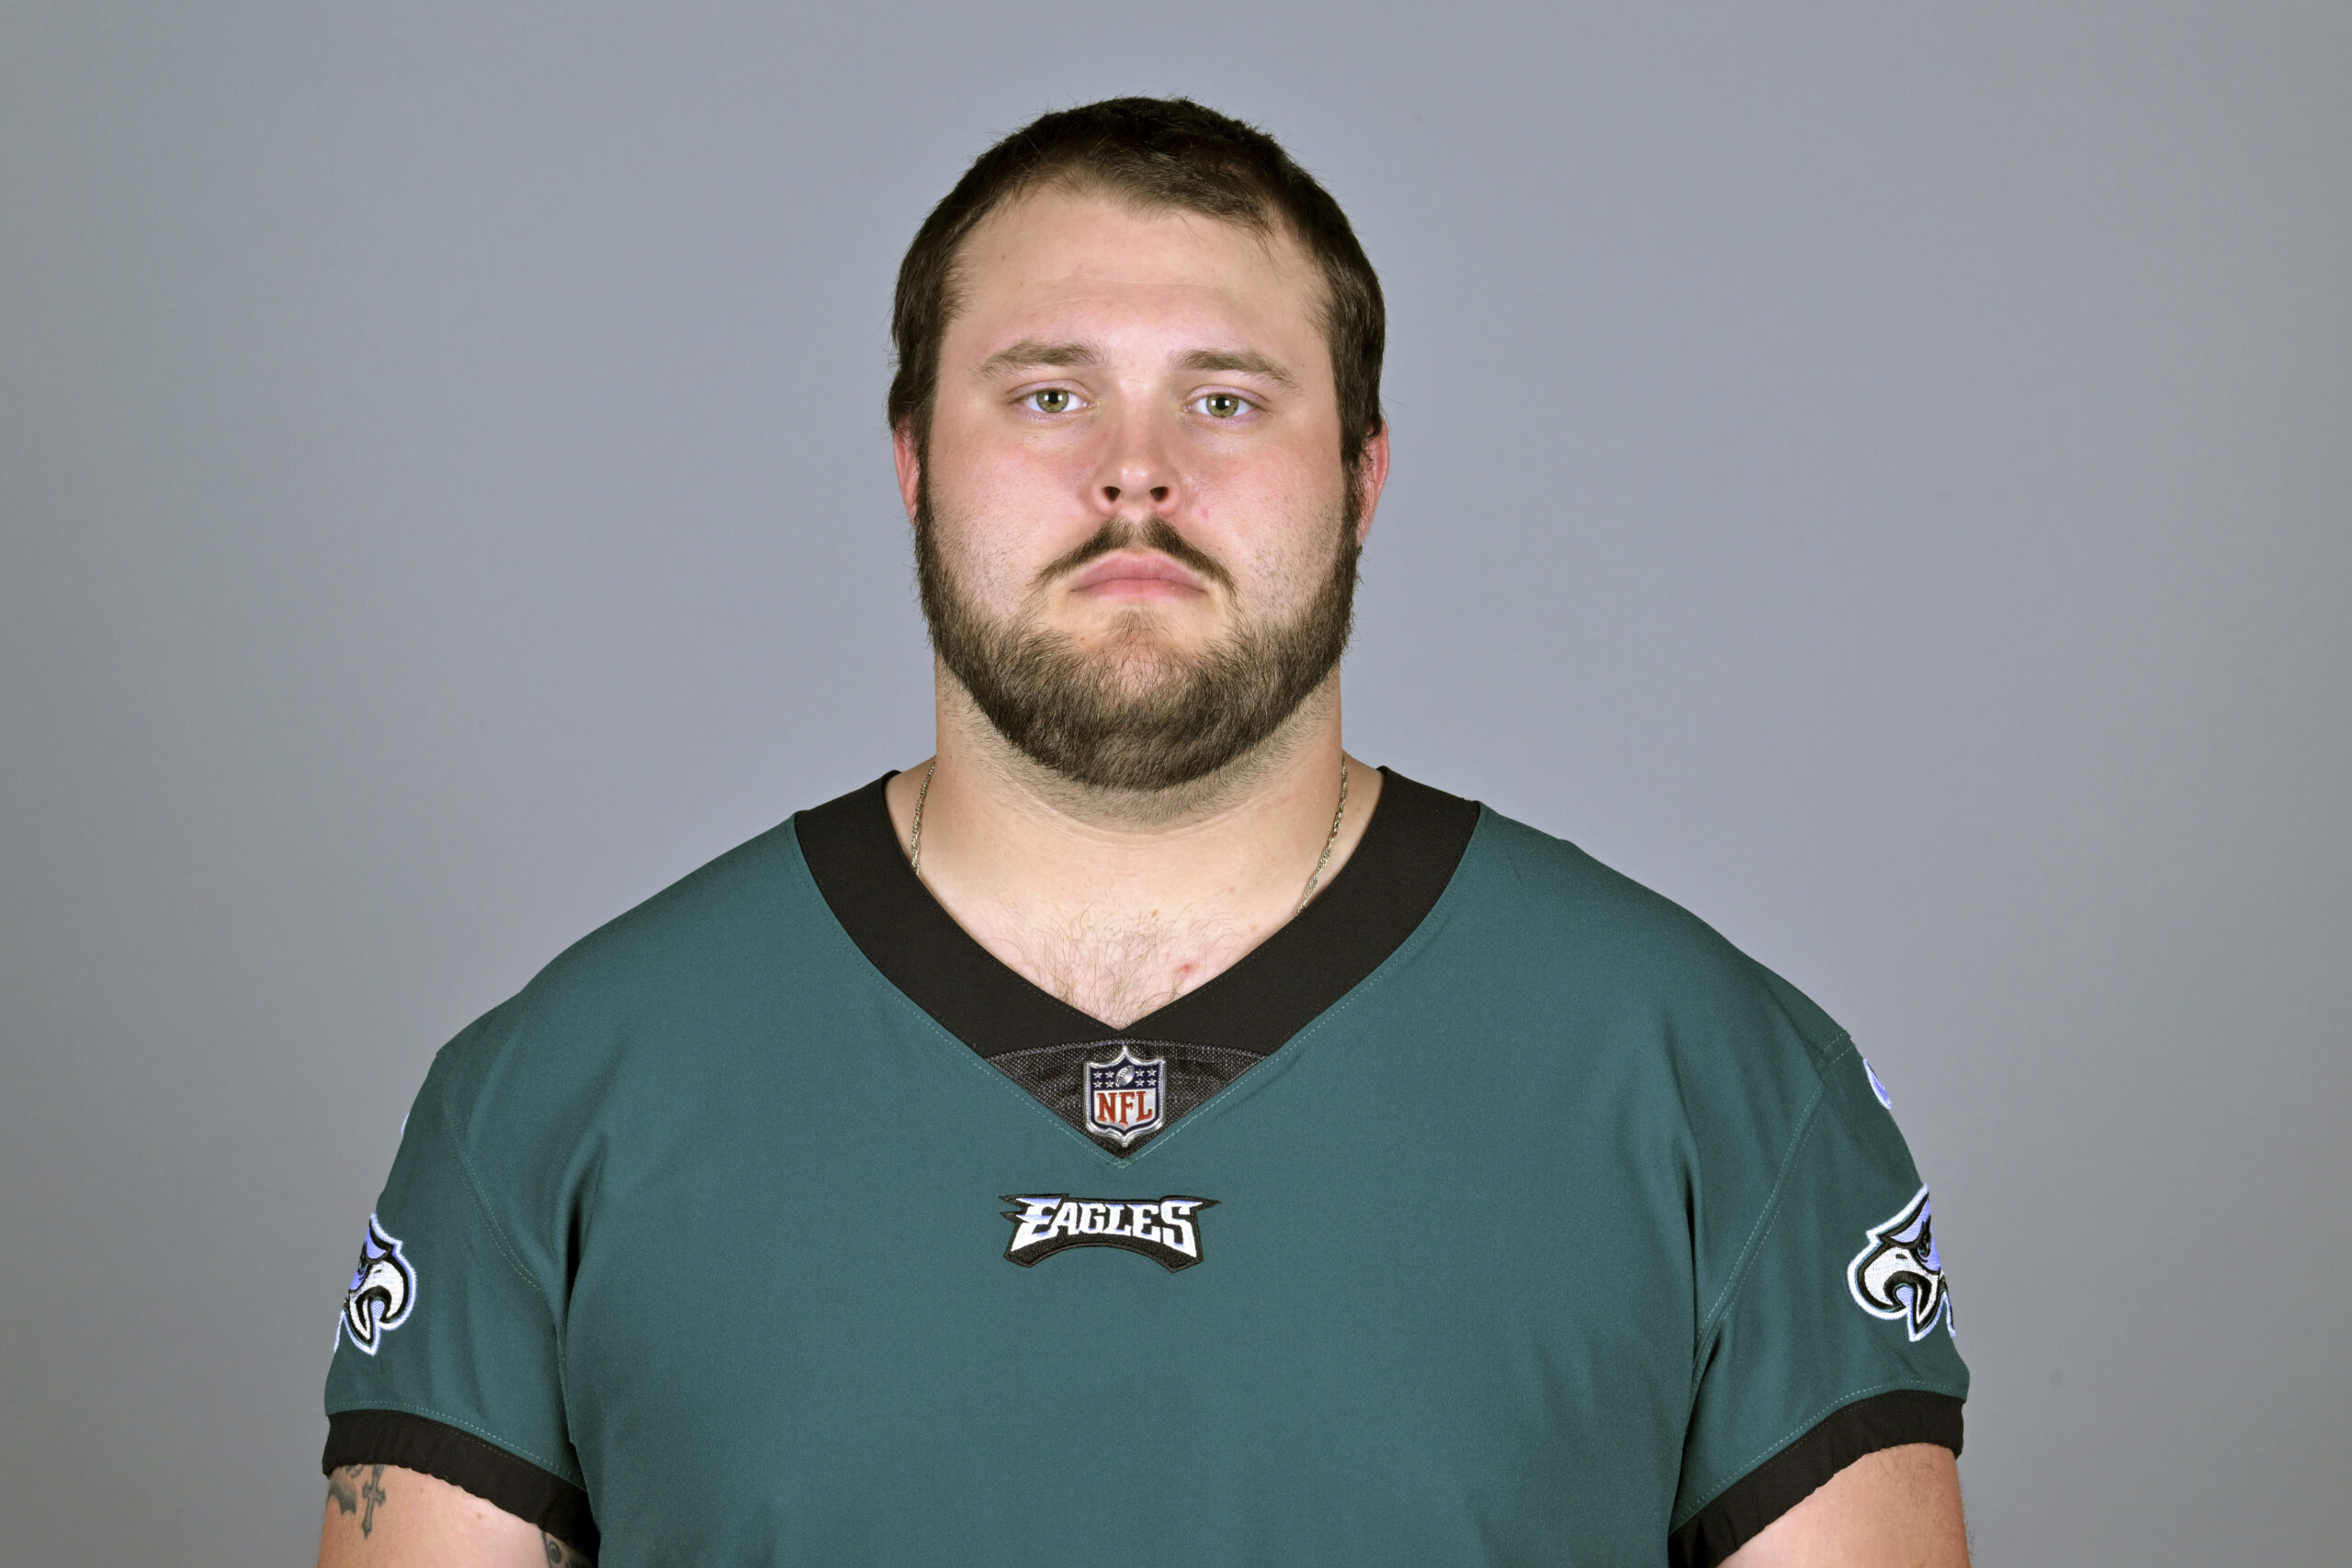 Josh Sills, a reserve offensive lineman for the NFC champion Philadelphia Eagles, has been indicted on rape and kidnapping charges that stem from an incident in Ohio just over three years ago, authorities said.